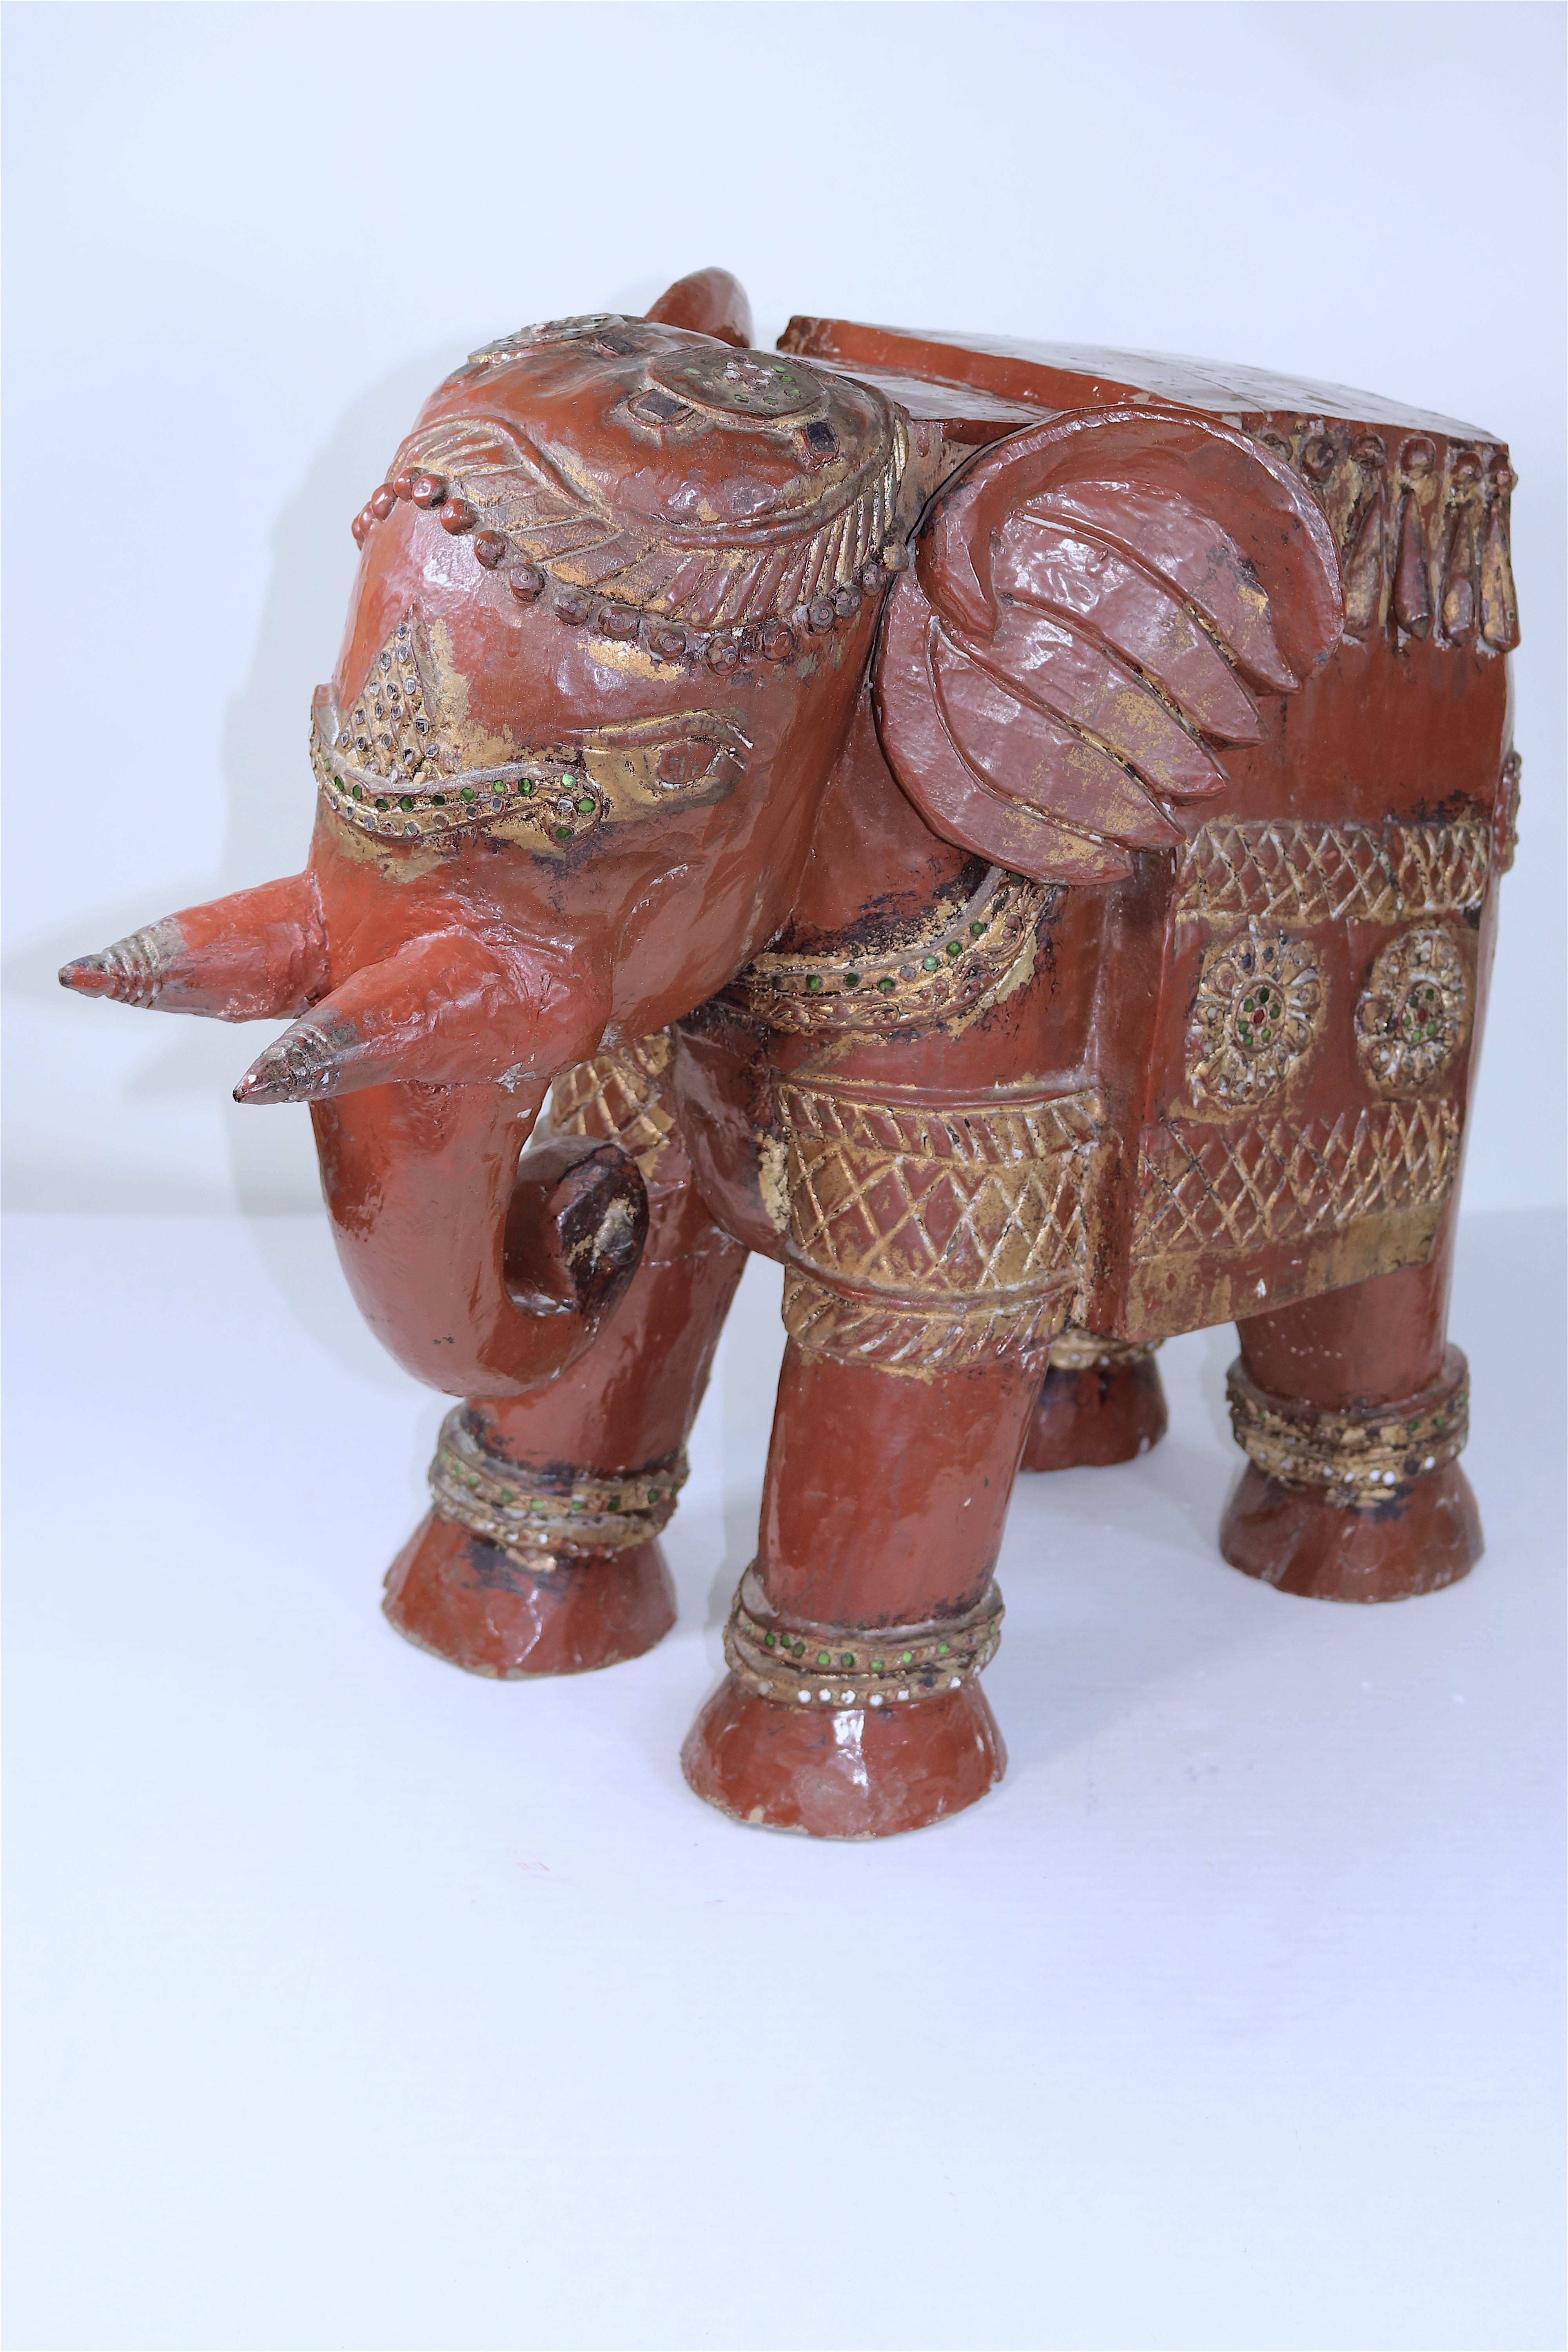 Lacquer Indian Oxblood Teak Carved Elephant Seats, Side Tables   19th Century